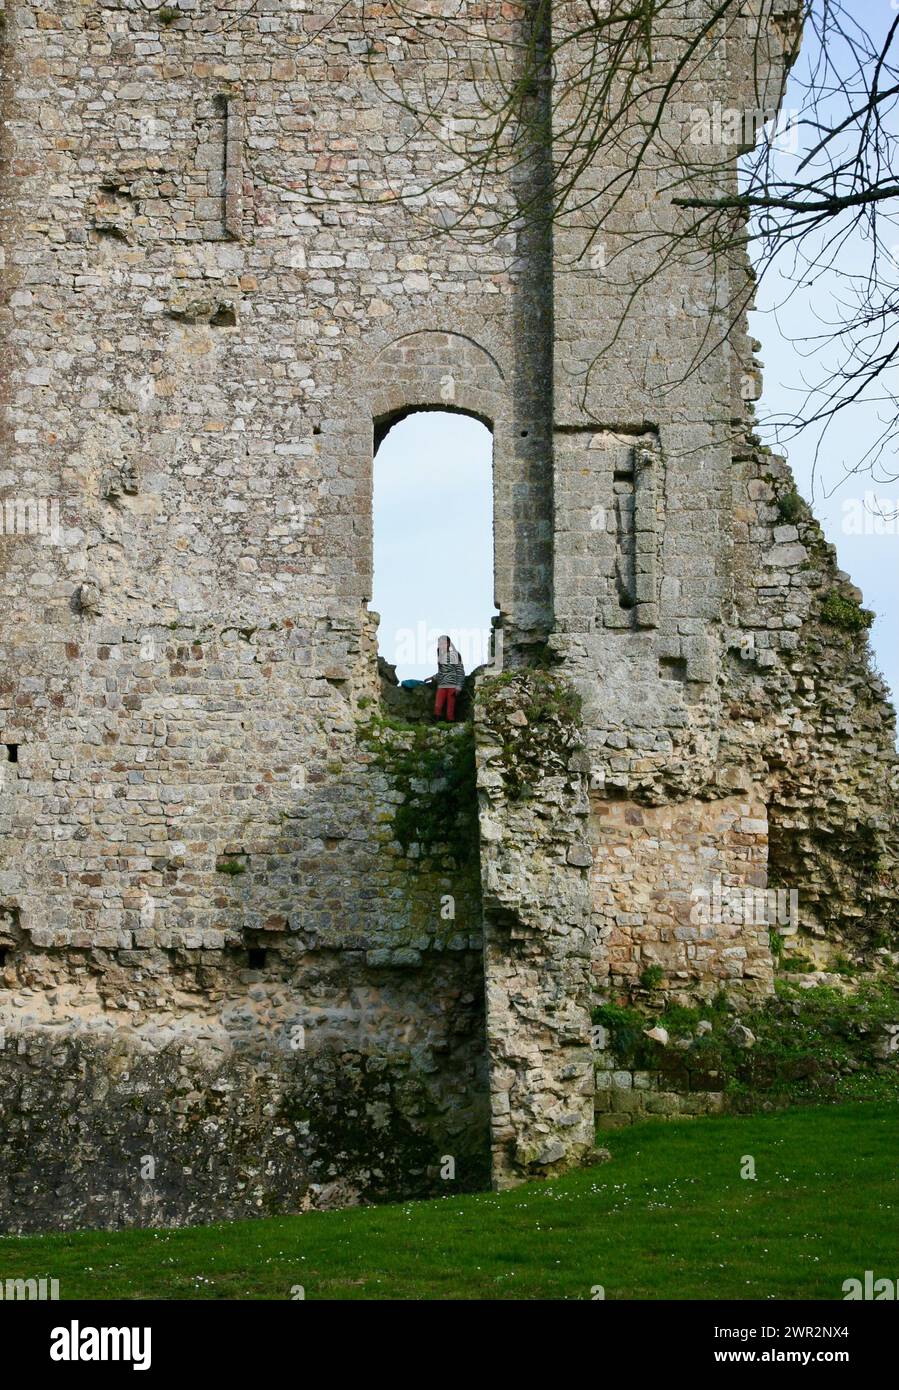 A view of a young girl climbing the walls of the chateau, at Domfront-en-Poiraie in Normandy, France, Europe Stock Photo